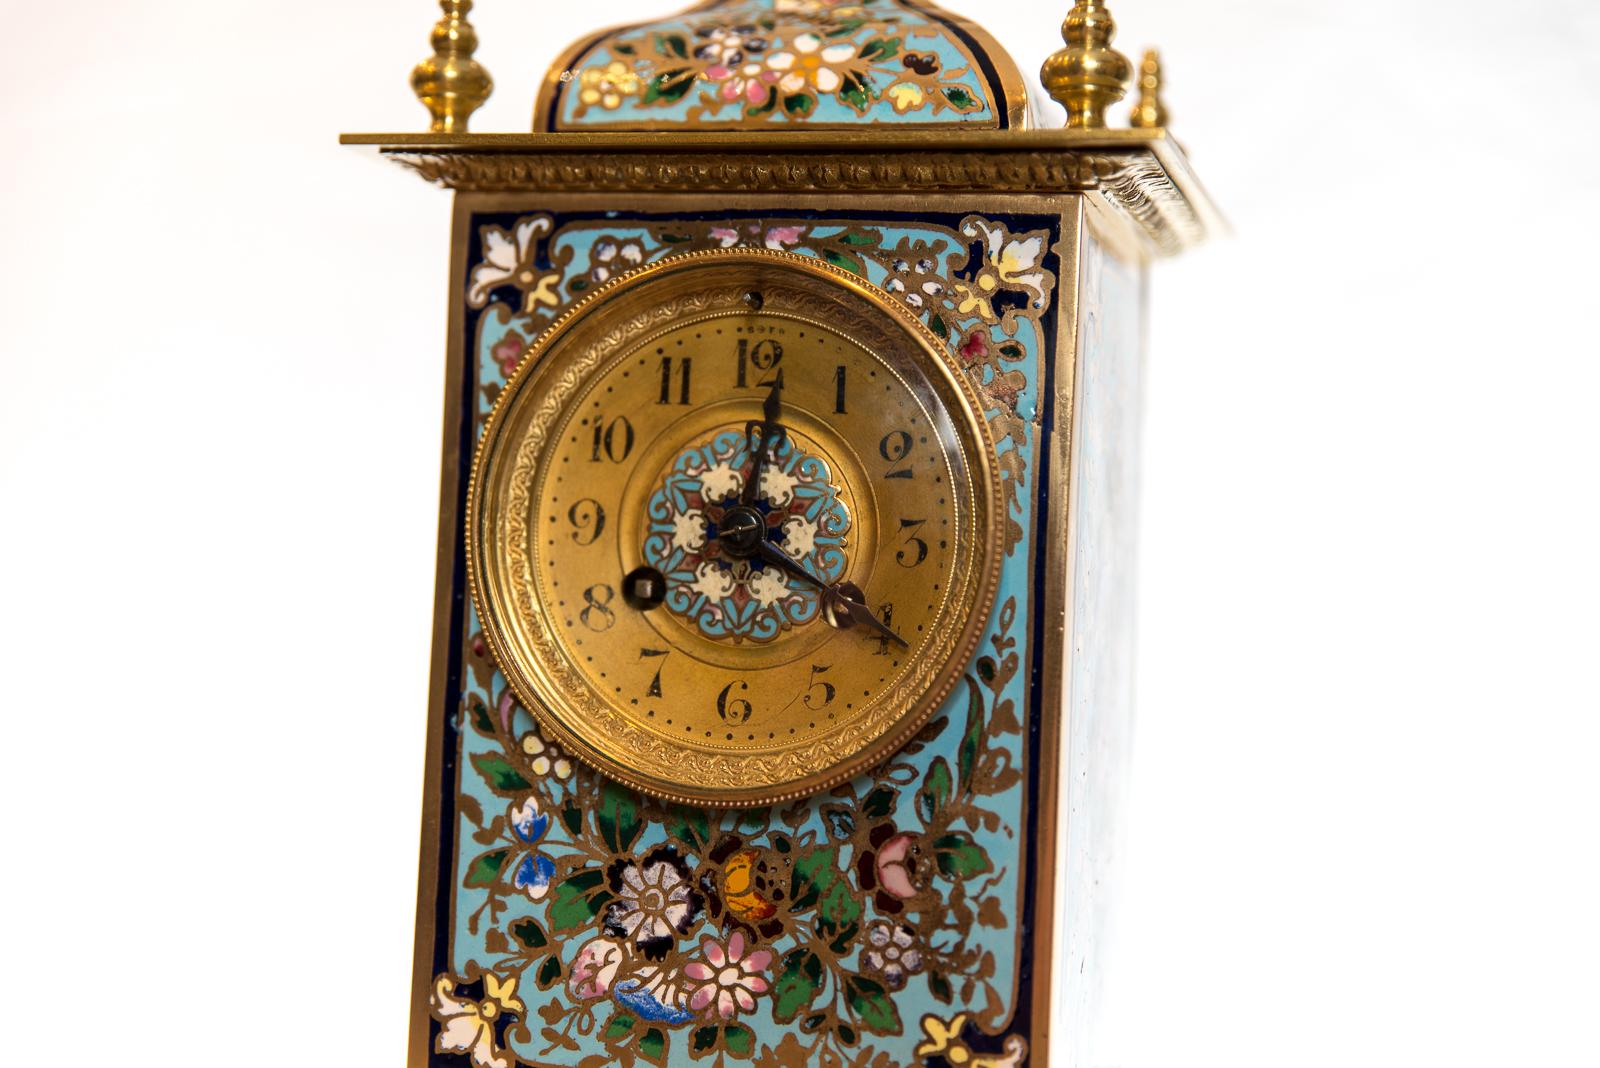 An 8 day late 19th century Champlevé enamel mantel clock, striking the hours and half hours on a coiled gong. The movement signed by the makers Vincenti and Cie of Paris, France, circa 1875.